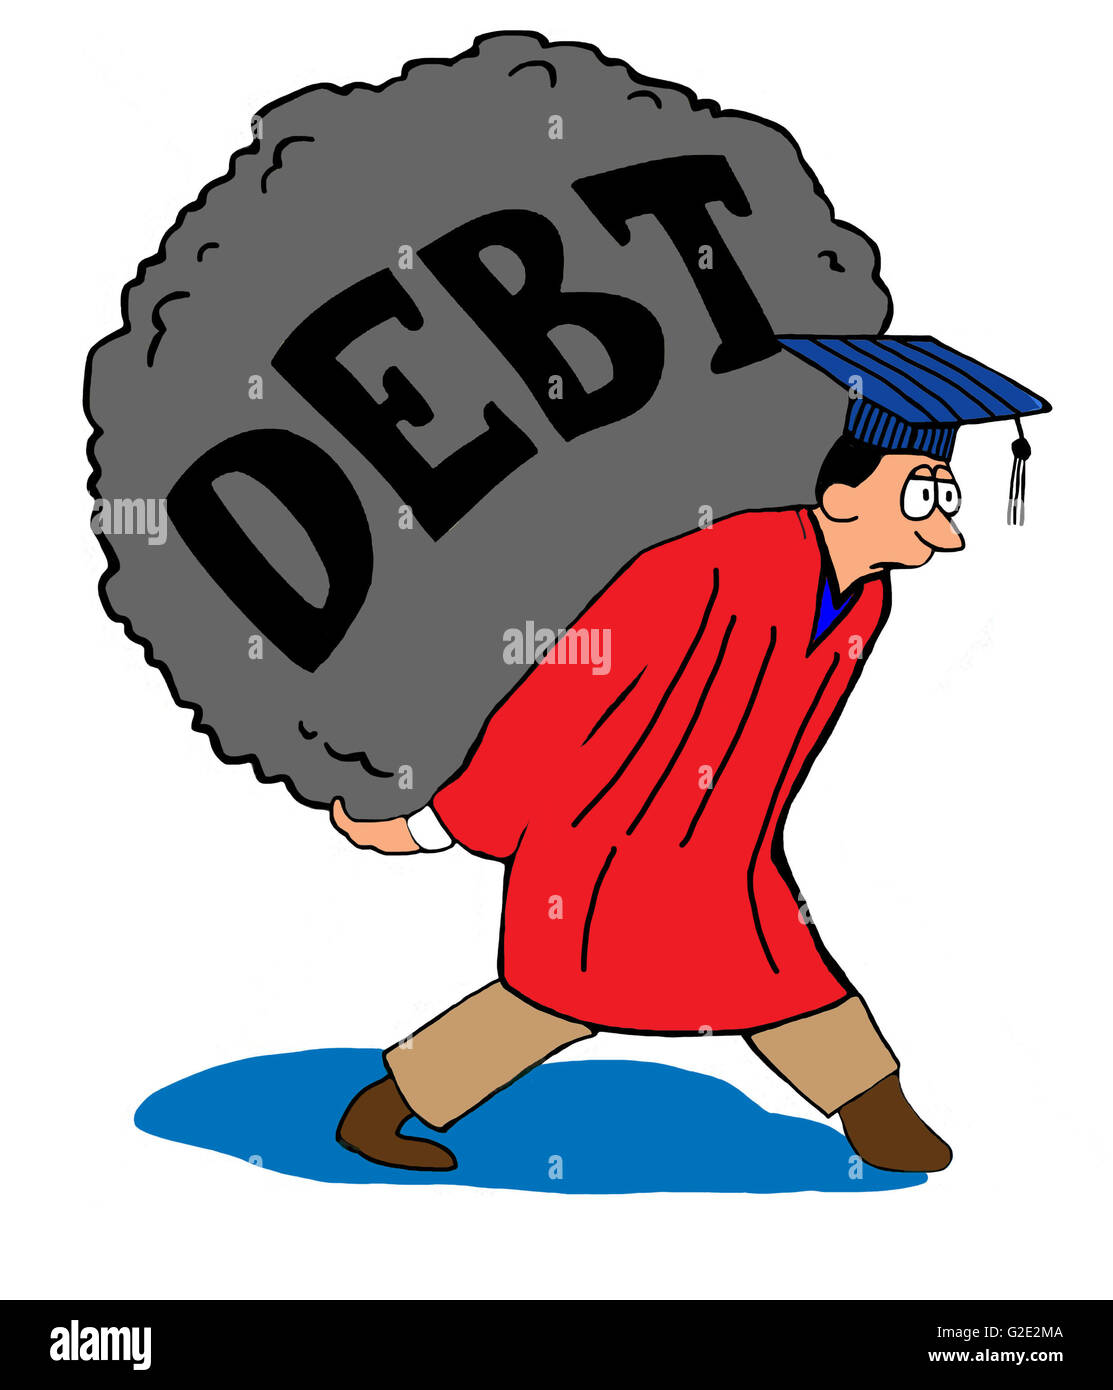 Illustration of college graduate carrying heavy tuition debt load. Stock Photo